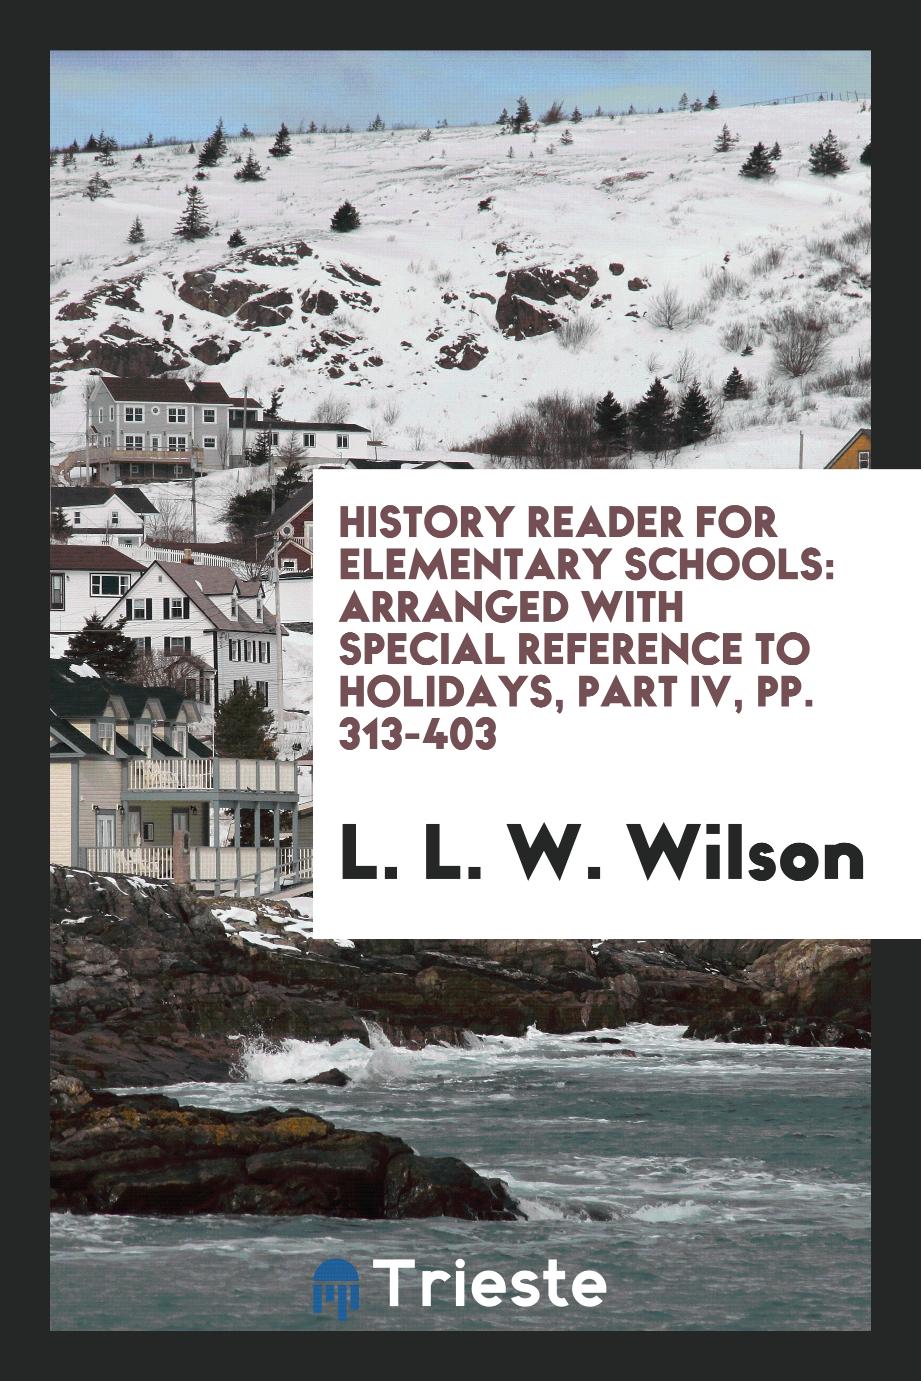 History Reader for Elementary Schools: Arranged with Special Reference to Holidays, Part IV, pp. 313-403